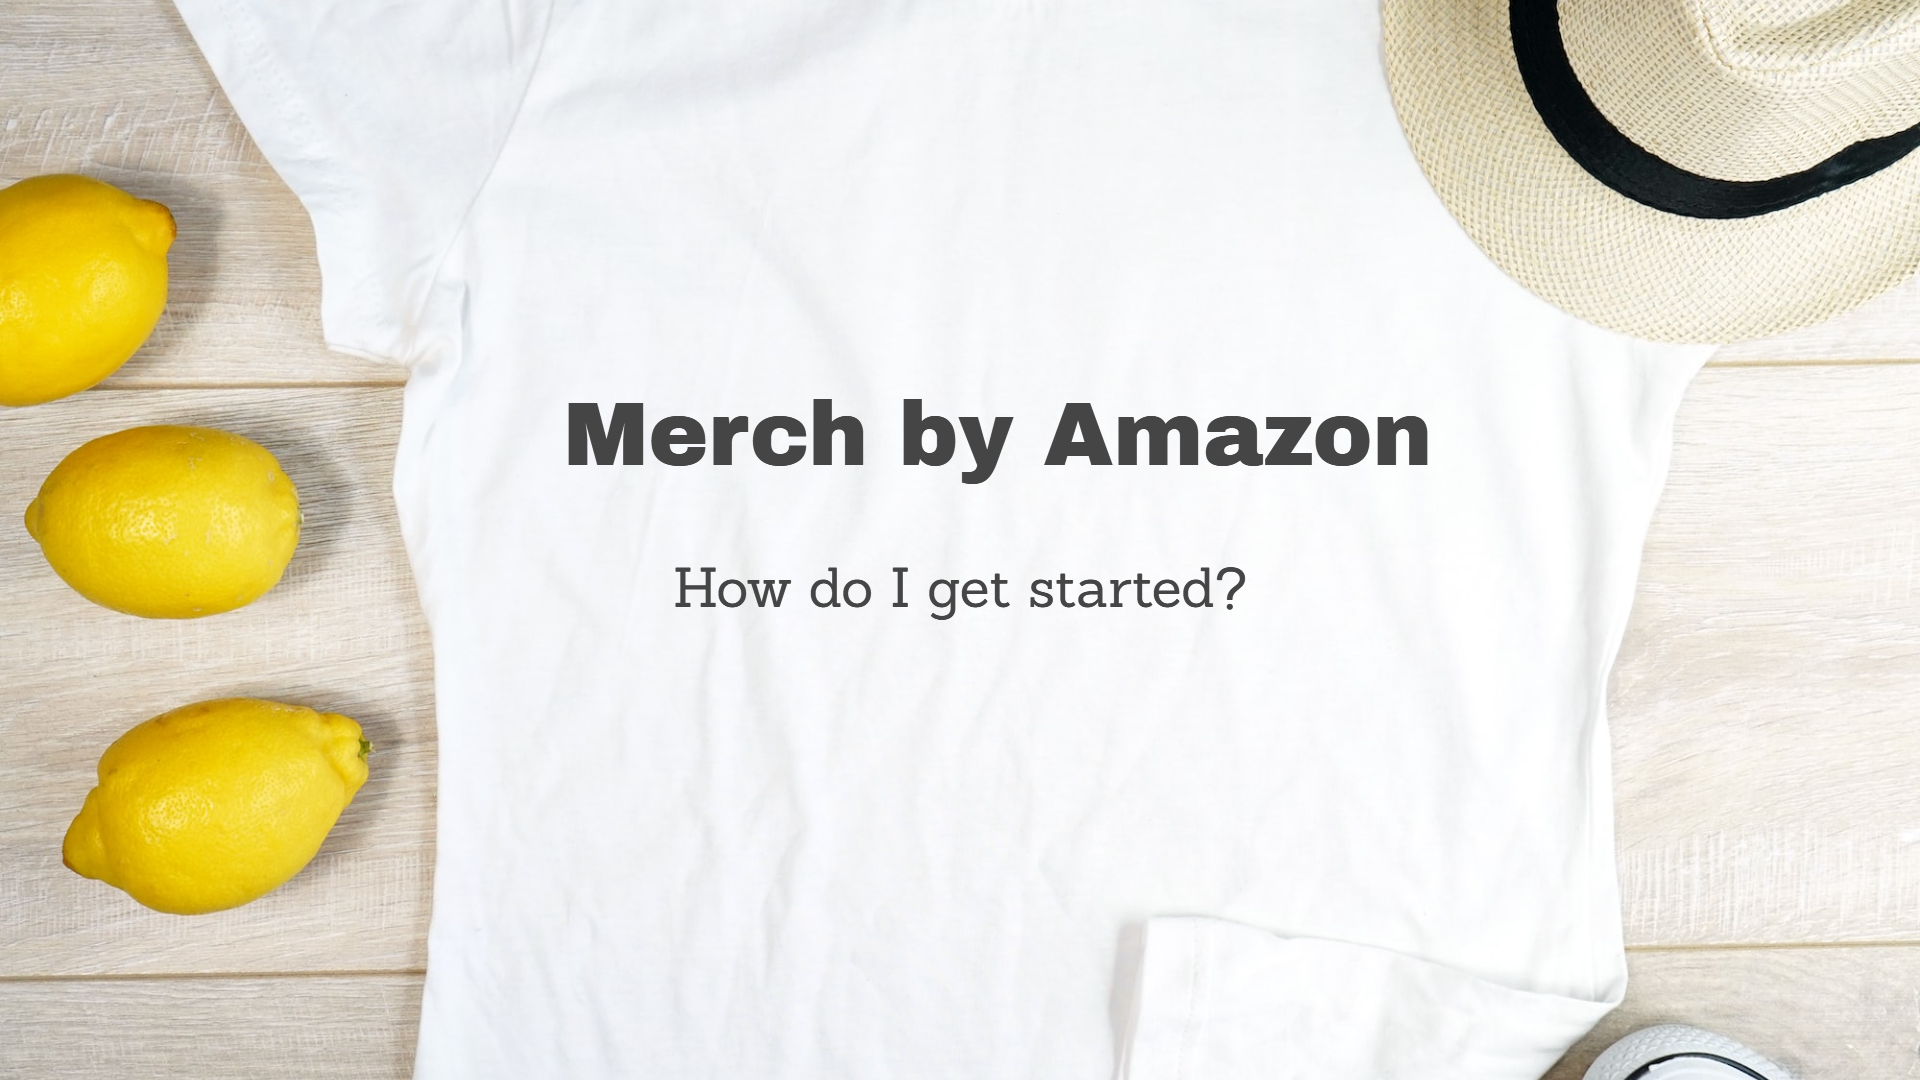 Merch by Amazon: How do I get started?